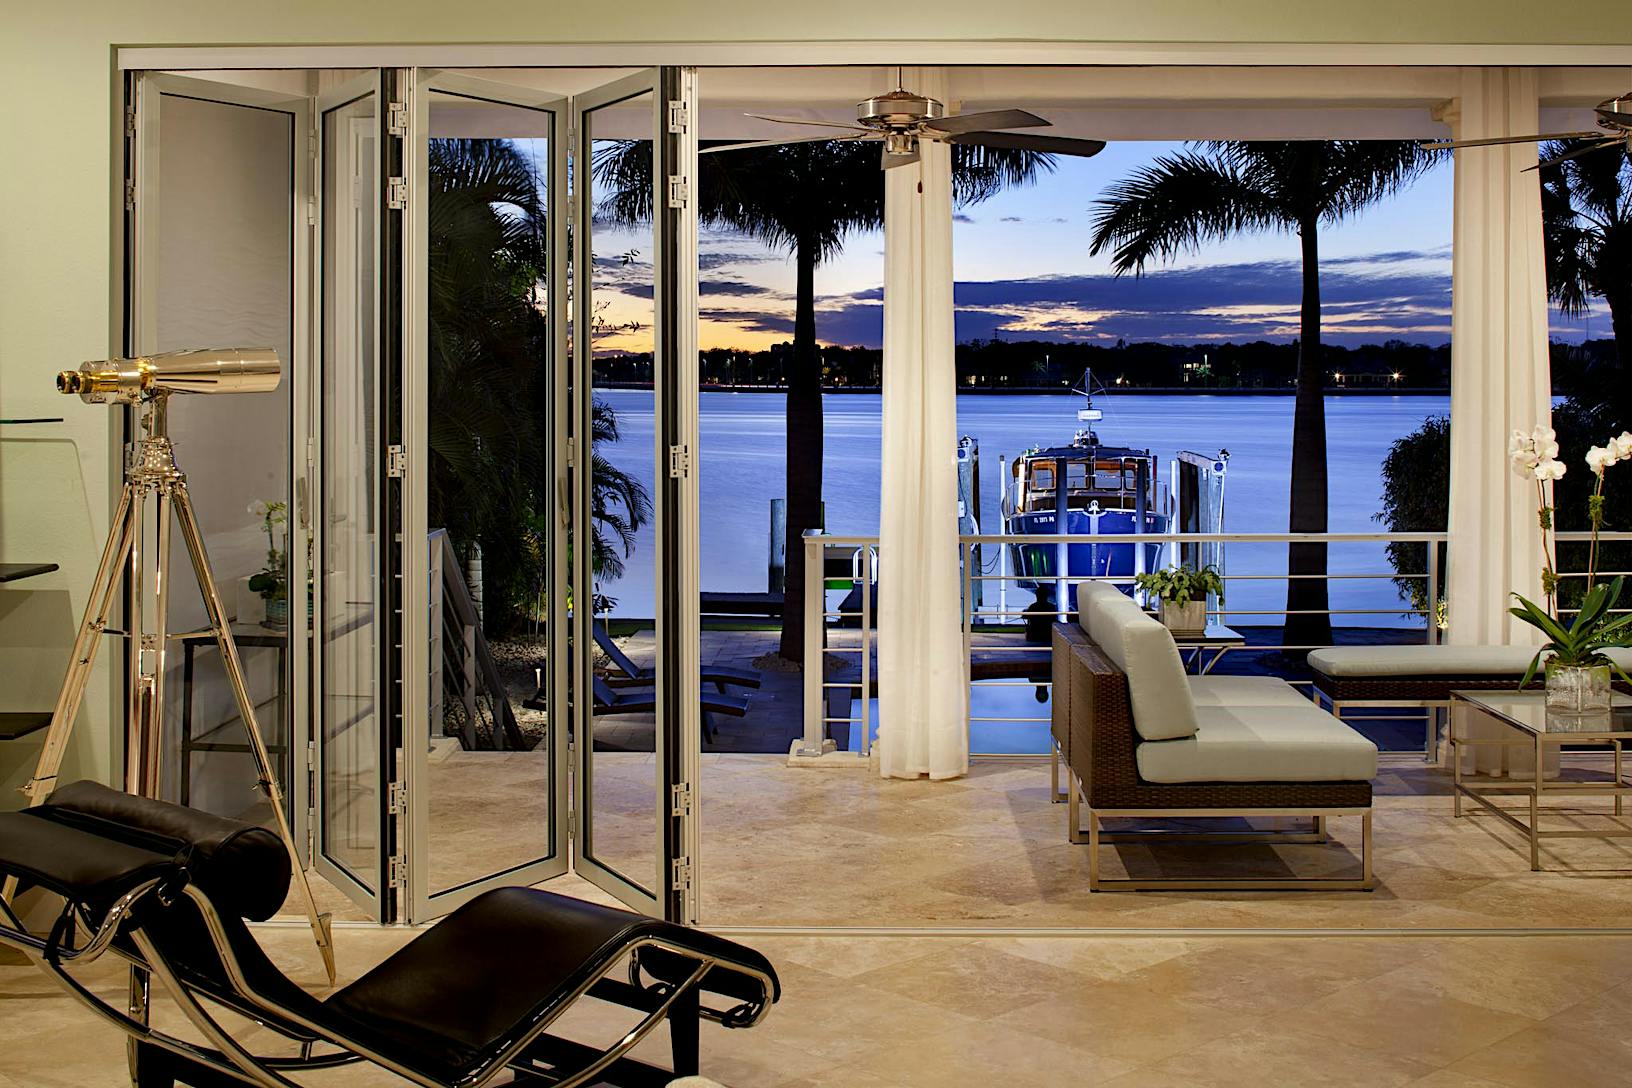 SL45 Living room folding glass walls with a view of the ocean and deck